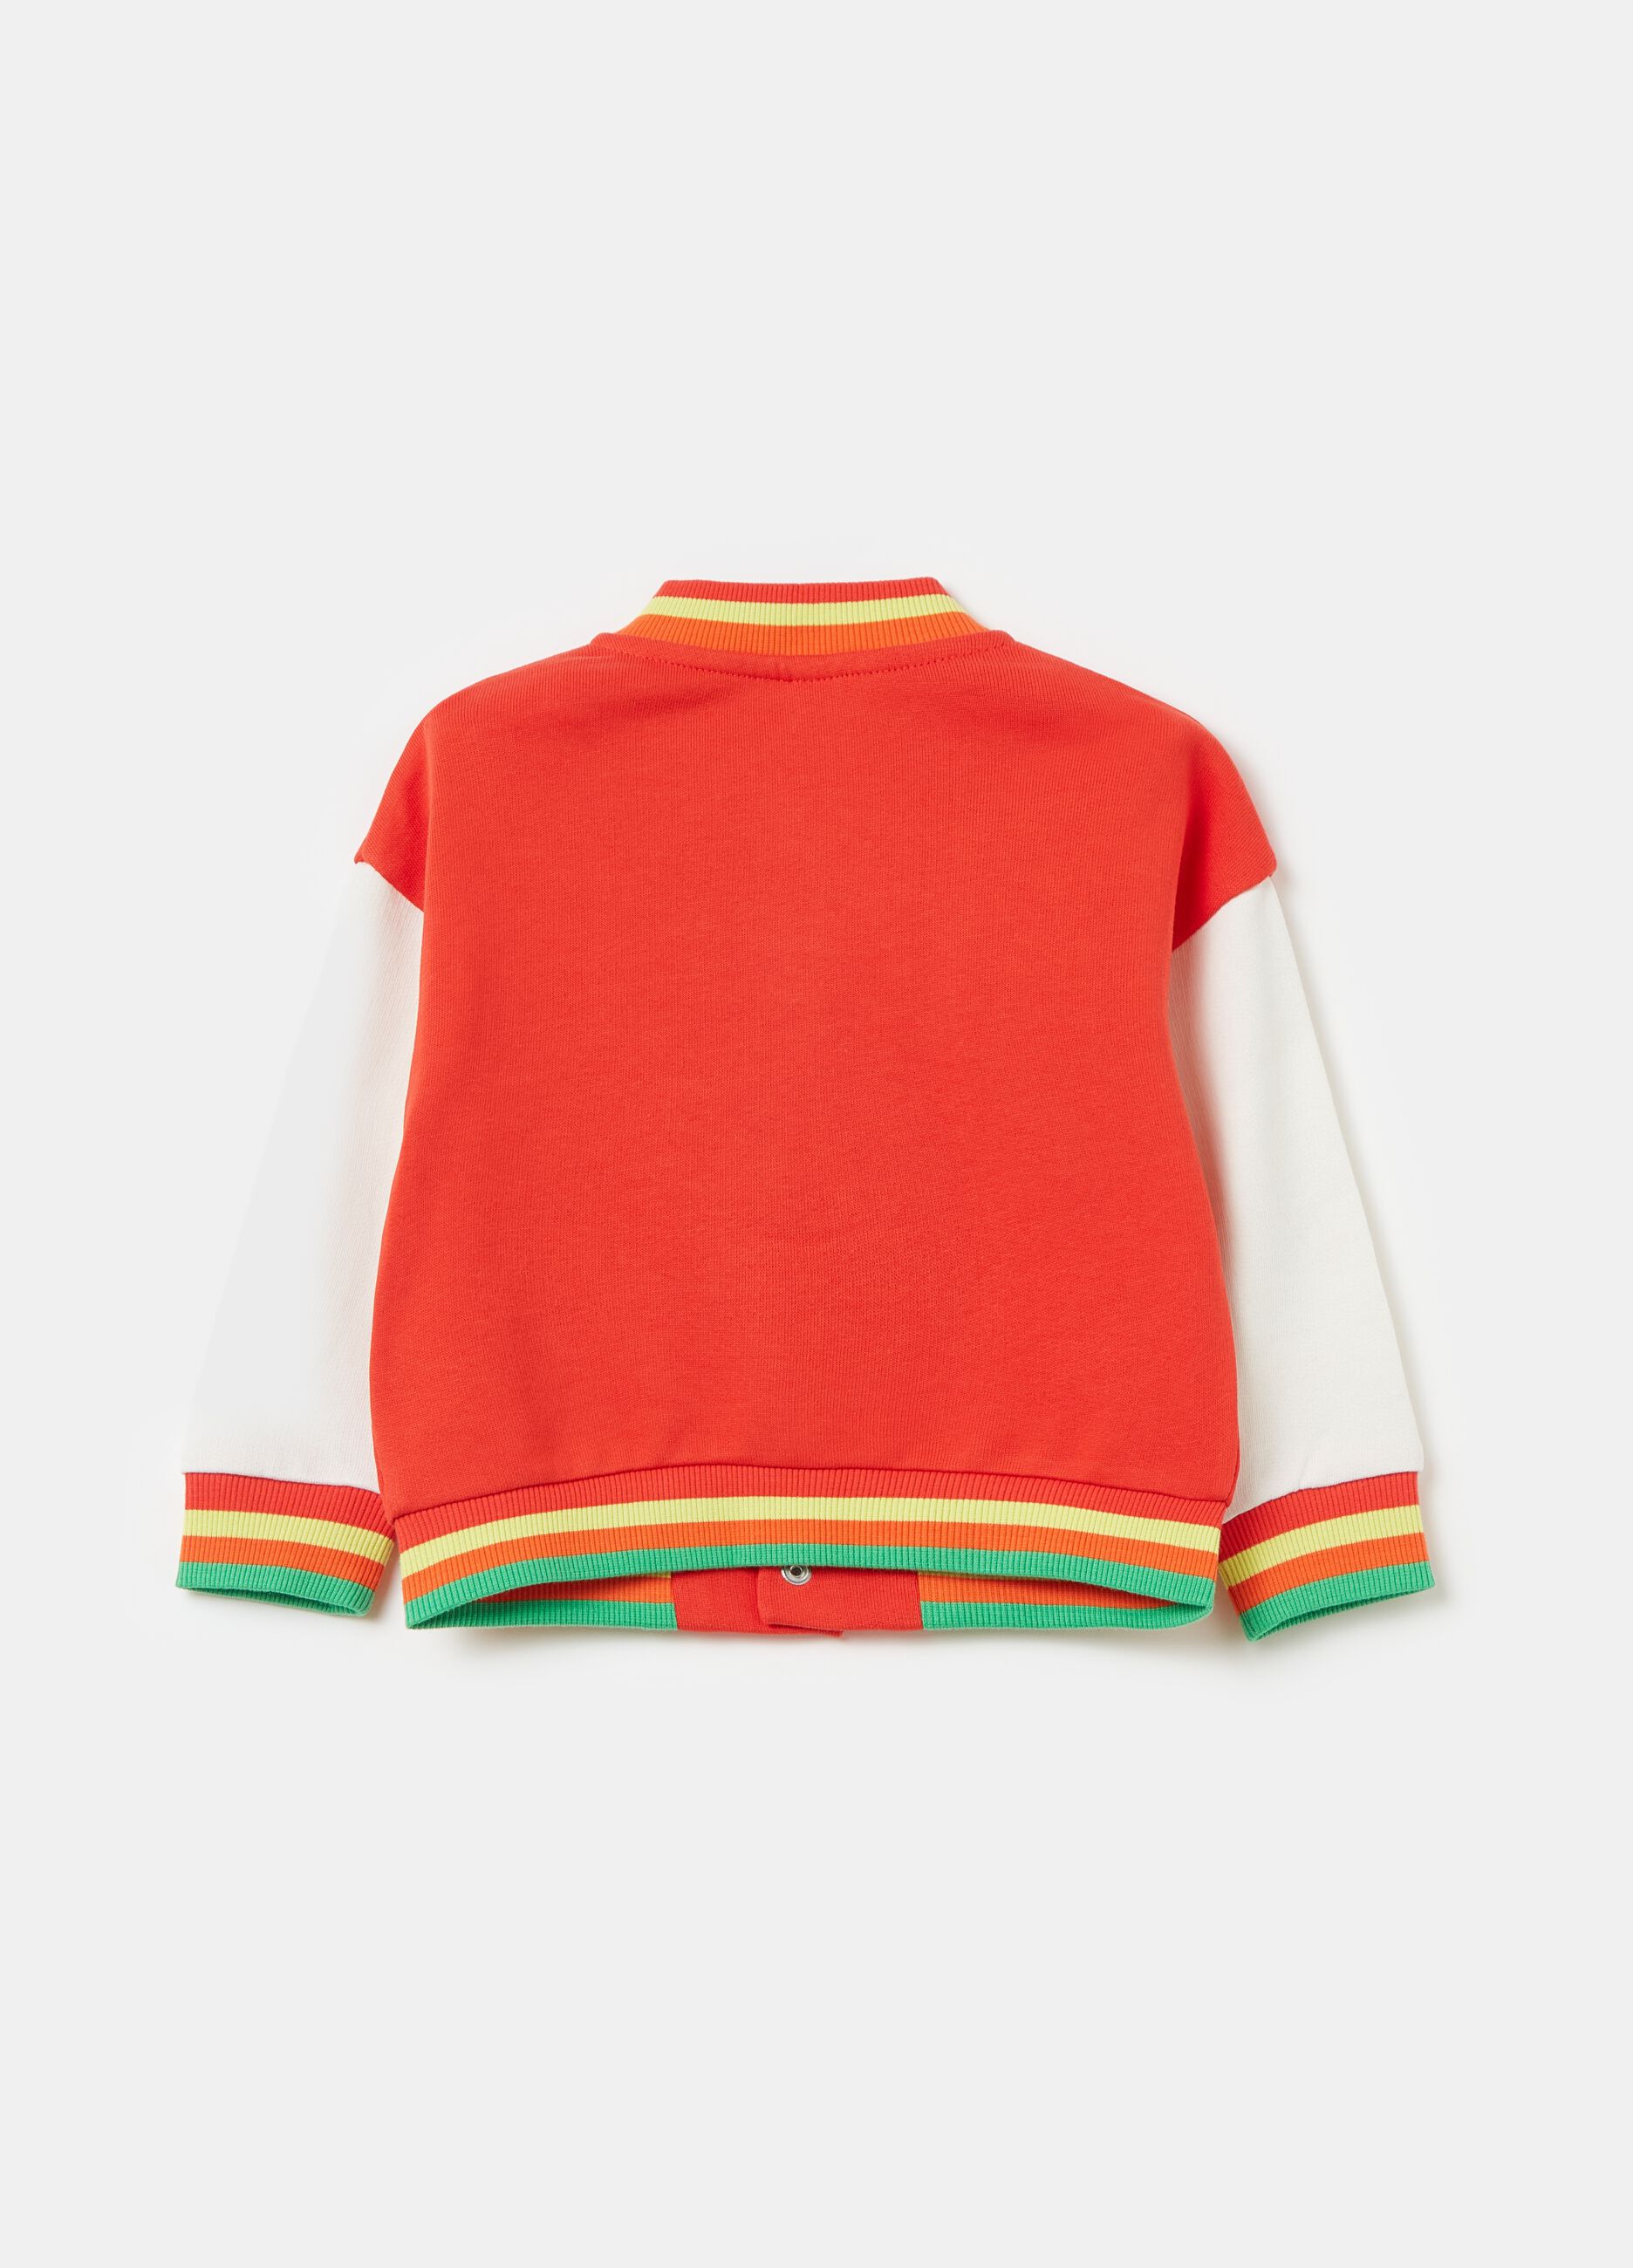 French terry varsity sweatshirt with print